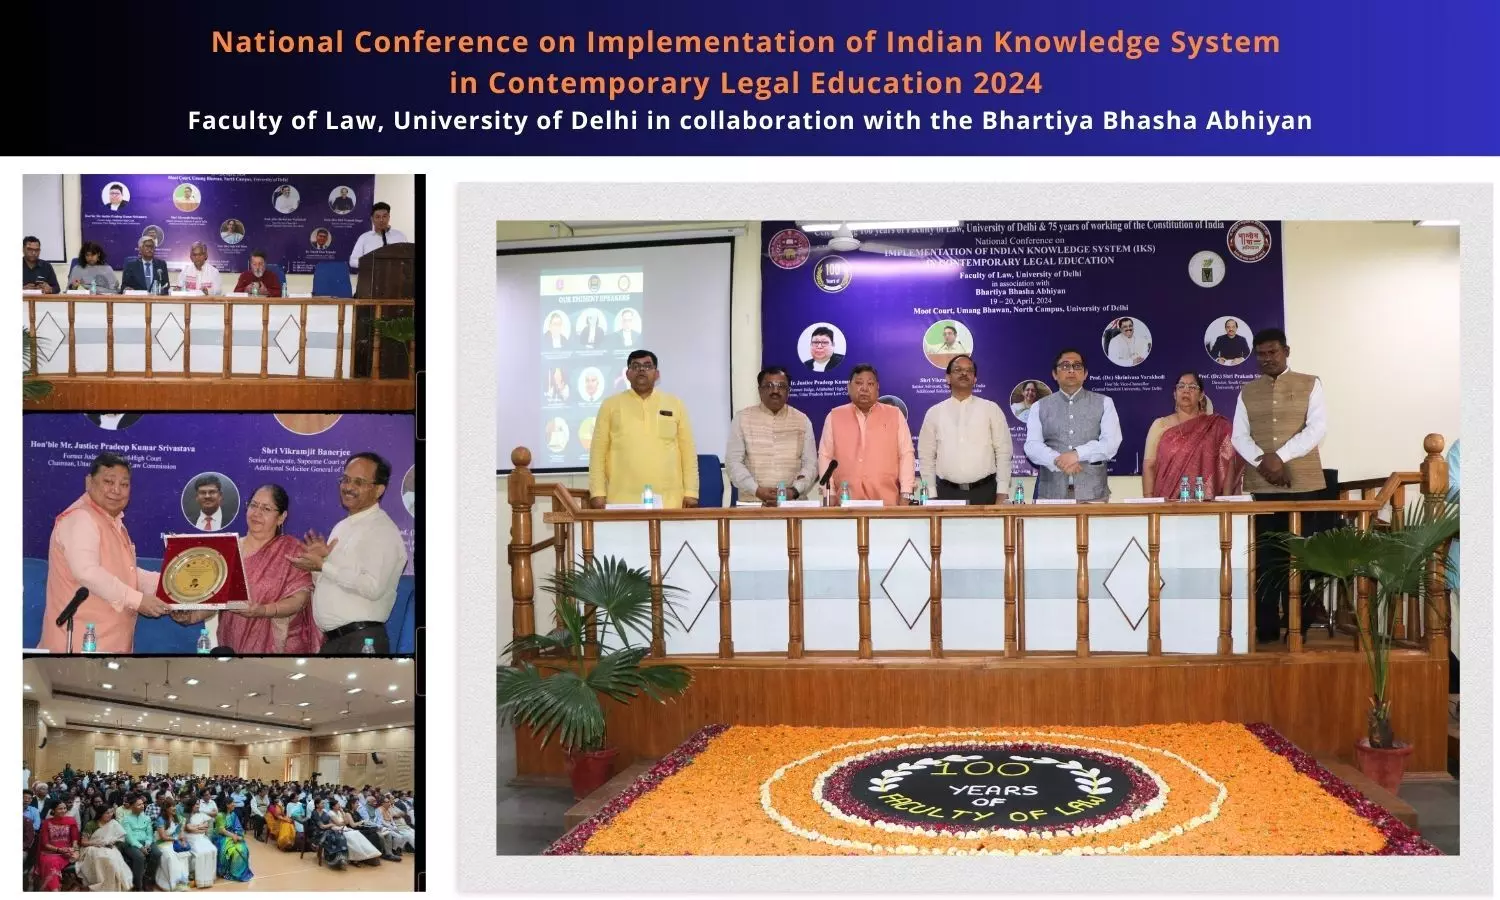 Successful Conclusion of National Conference on Implementation of Indian Knowledge System in Contemporary Legal Education at Faculty of Law, University of Delhi